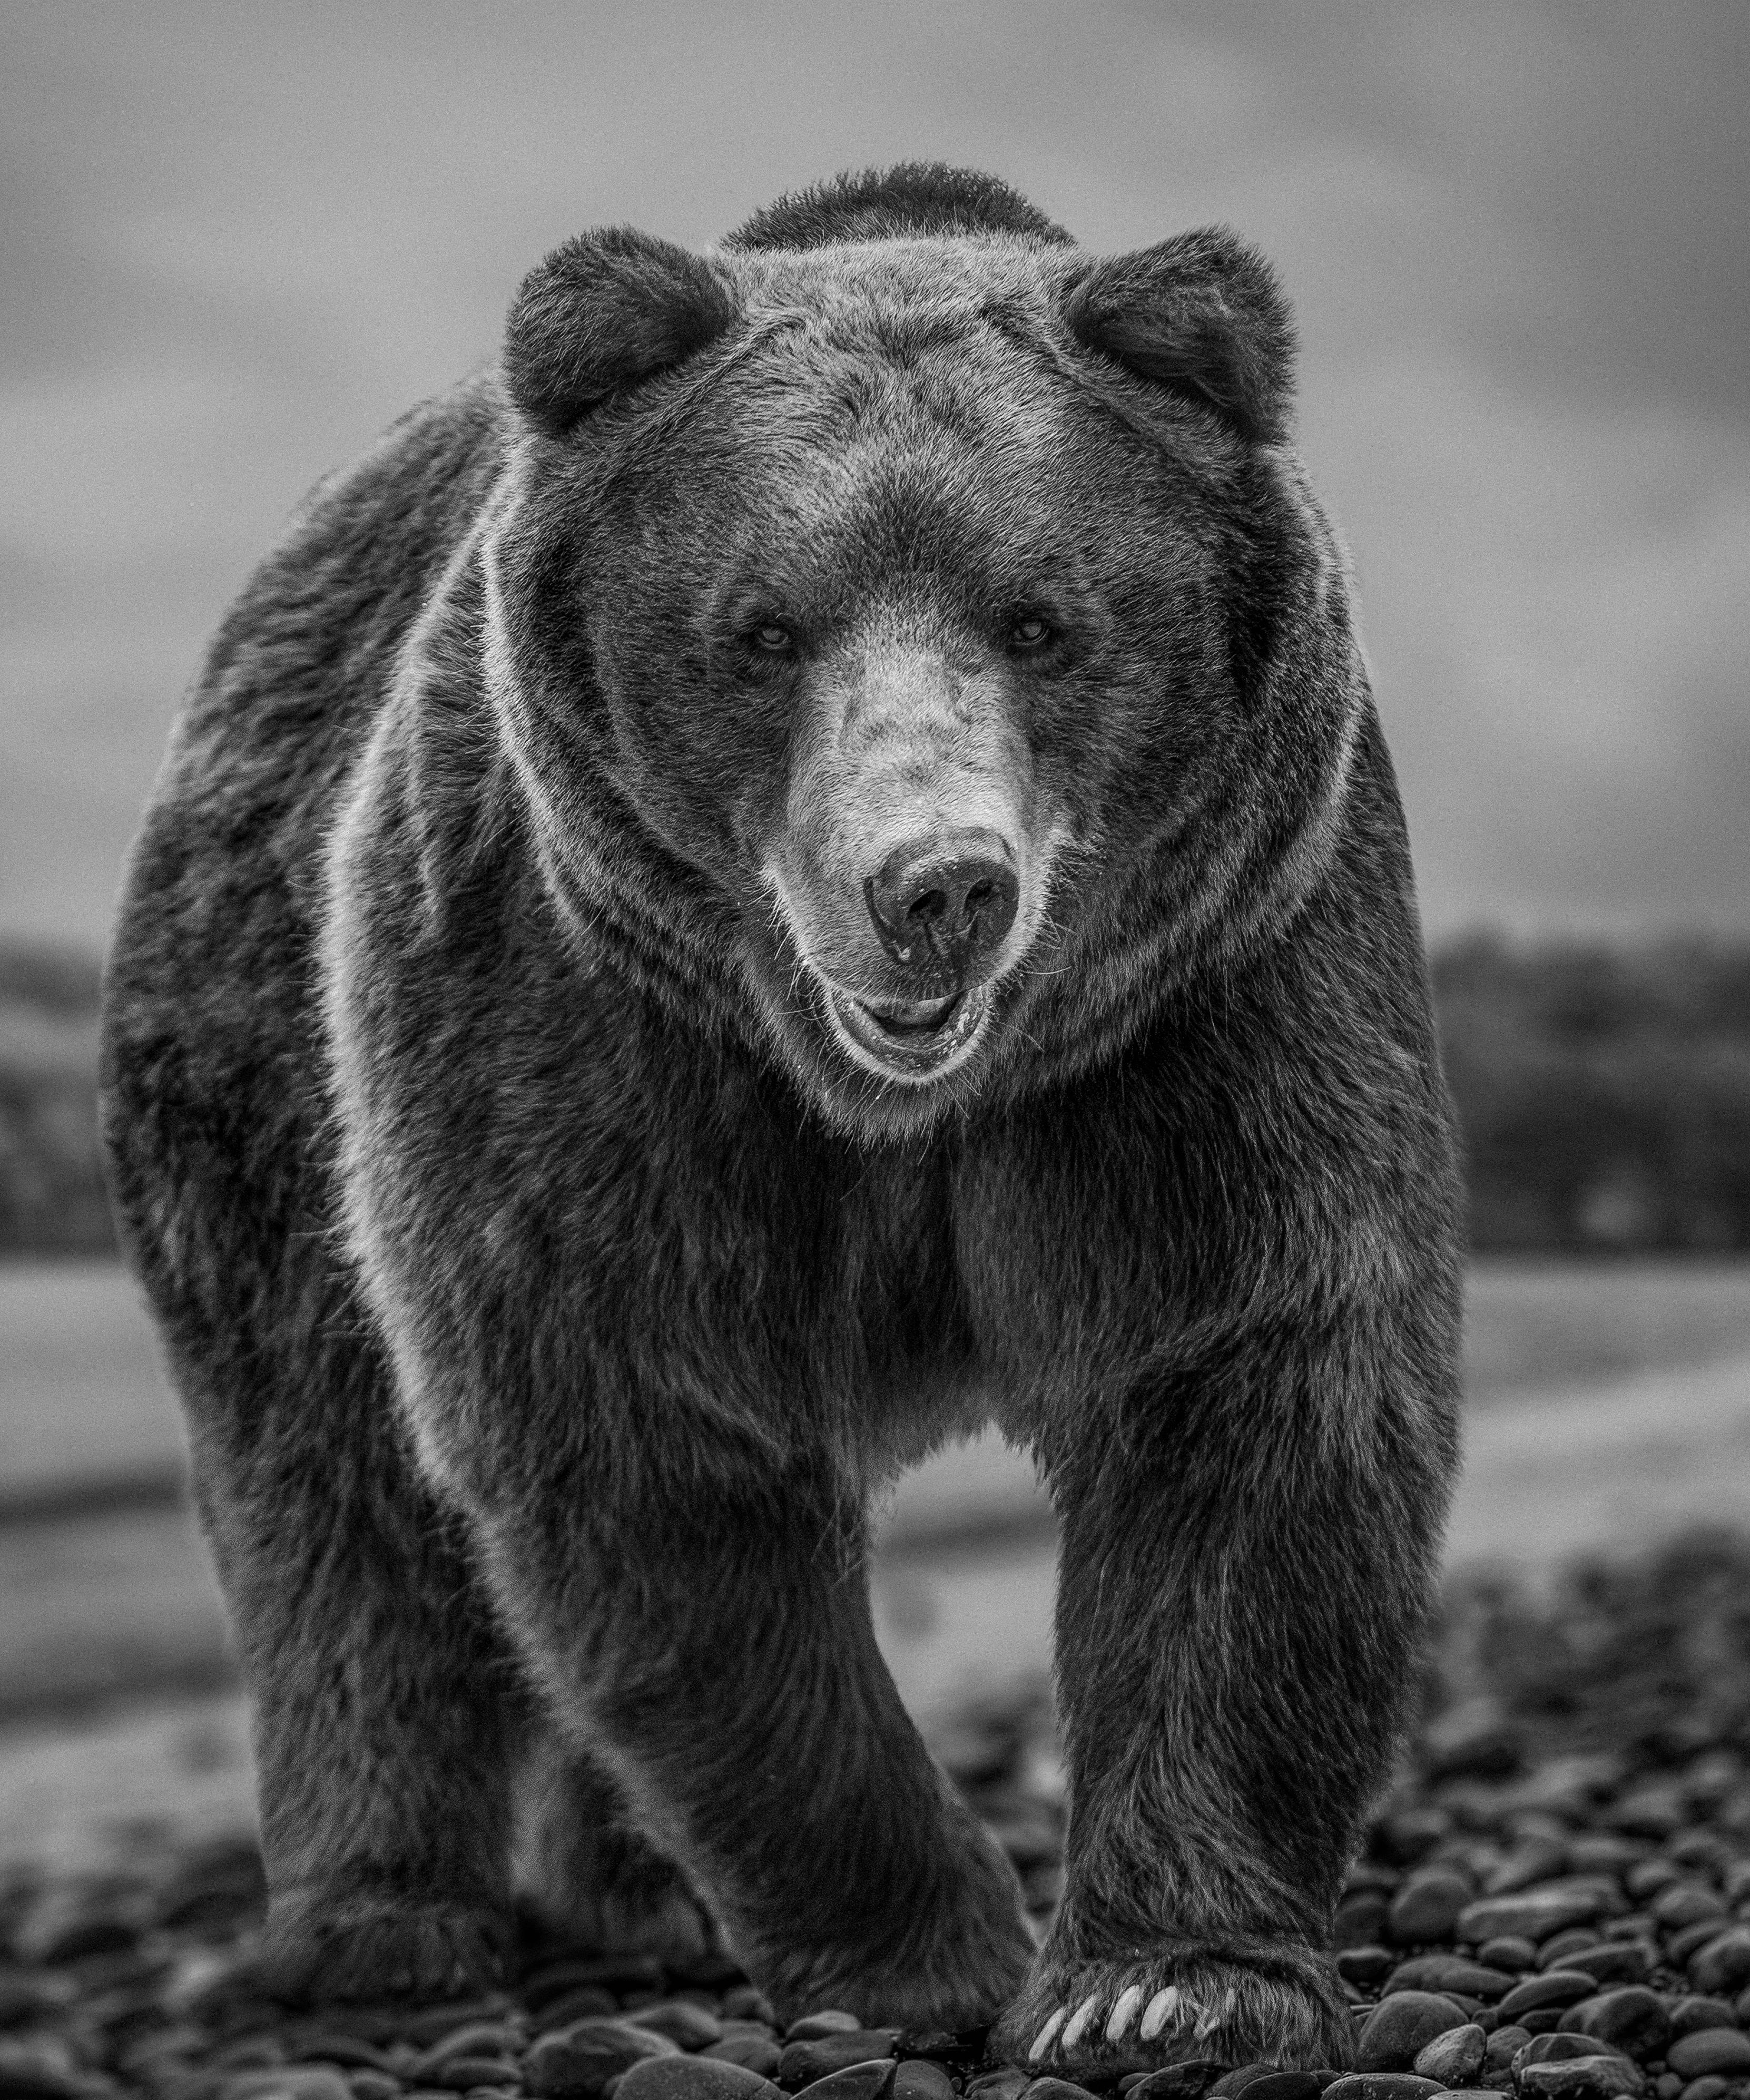 Shane Russeck Animal Print - "Bear Beach" 60x45 Black & White Photography, Grizzly Bear, Unsigned Photograph 